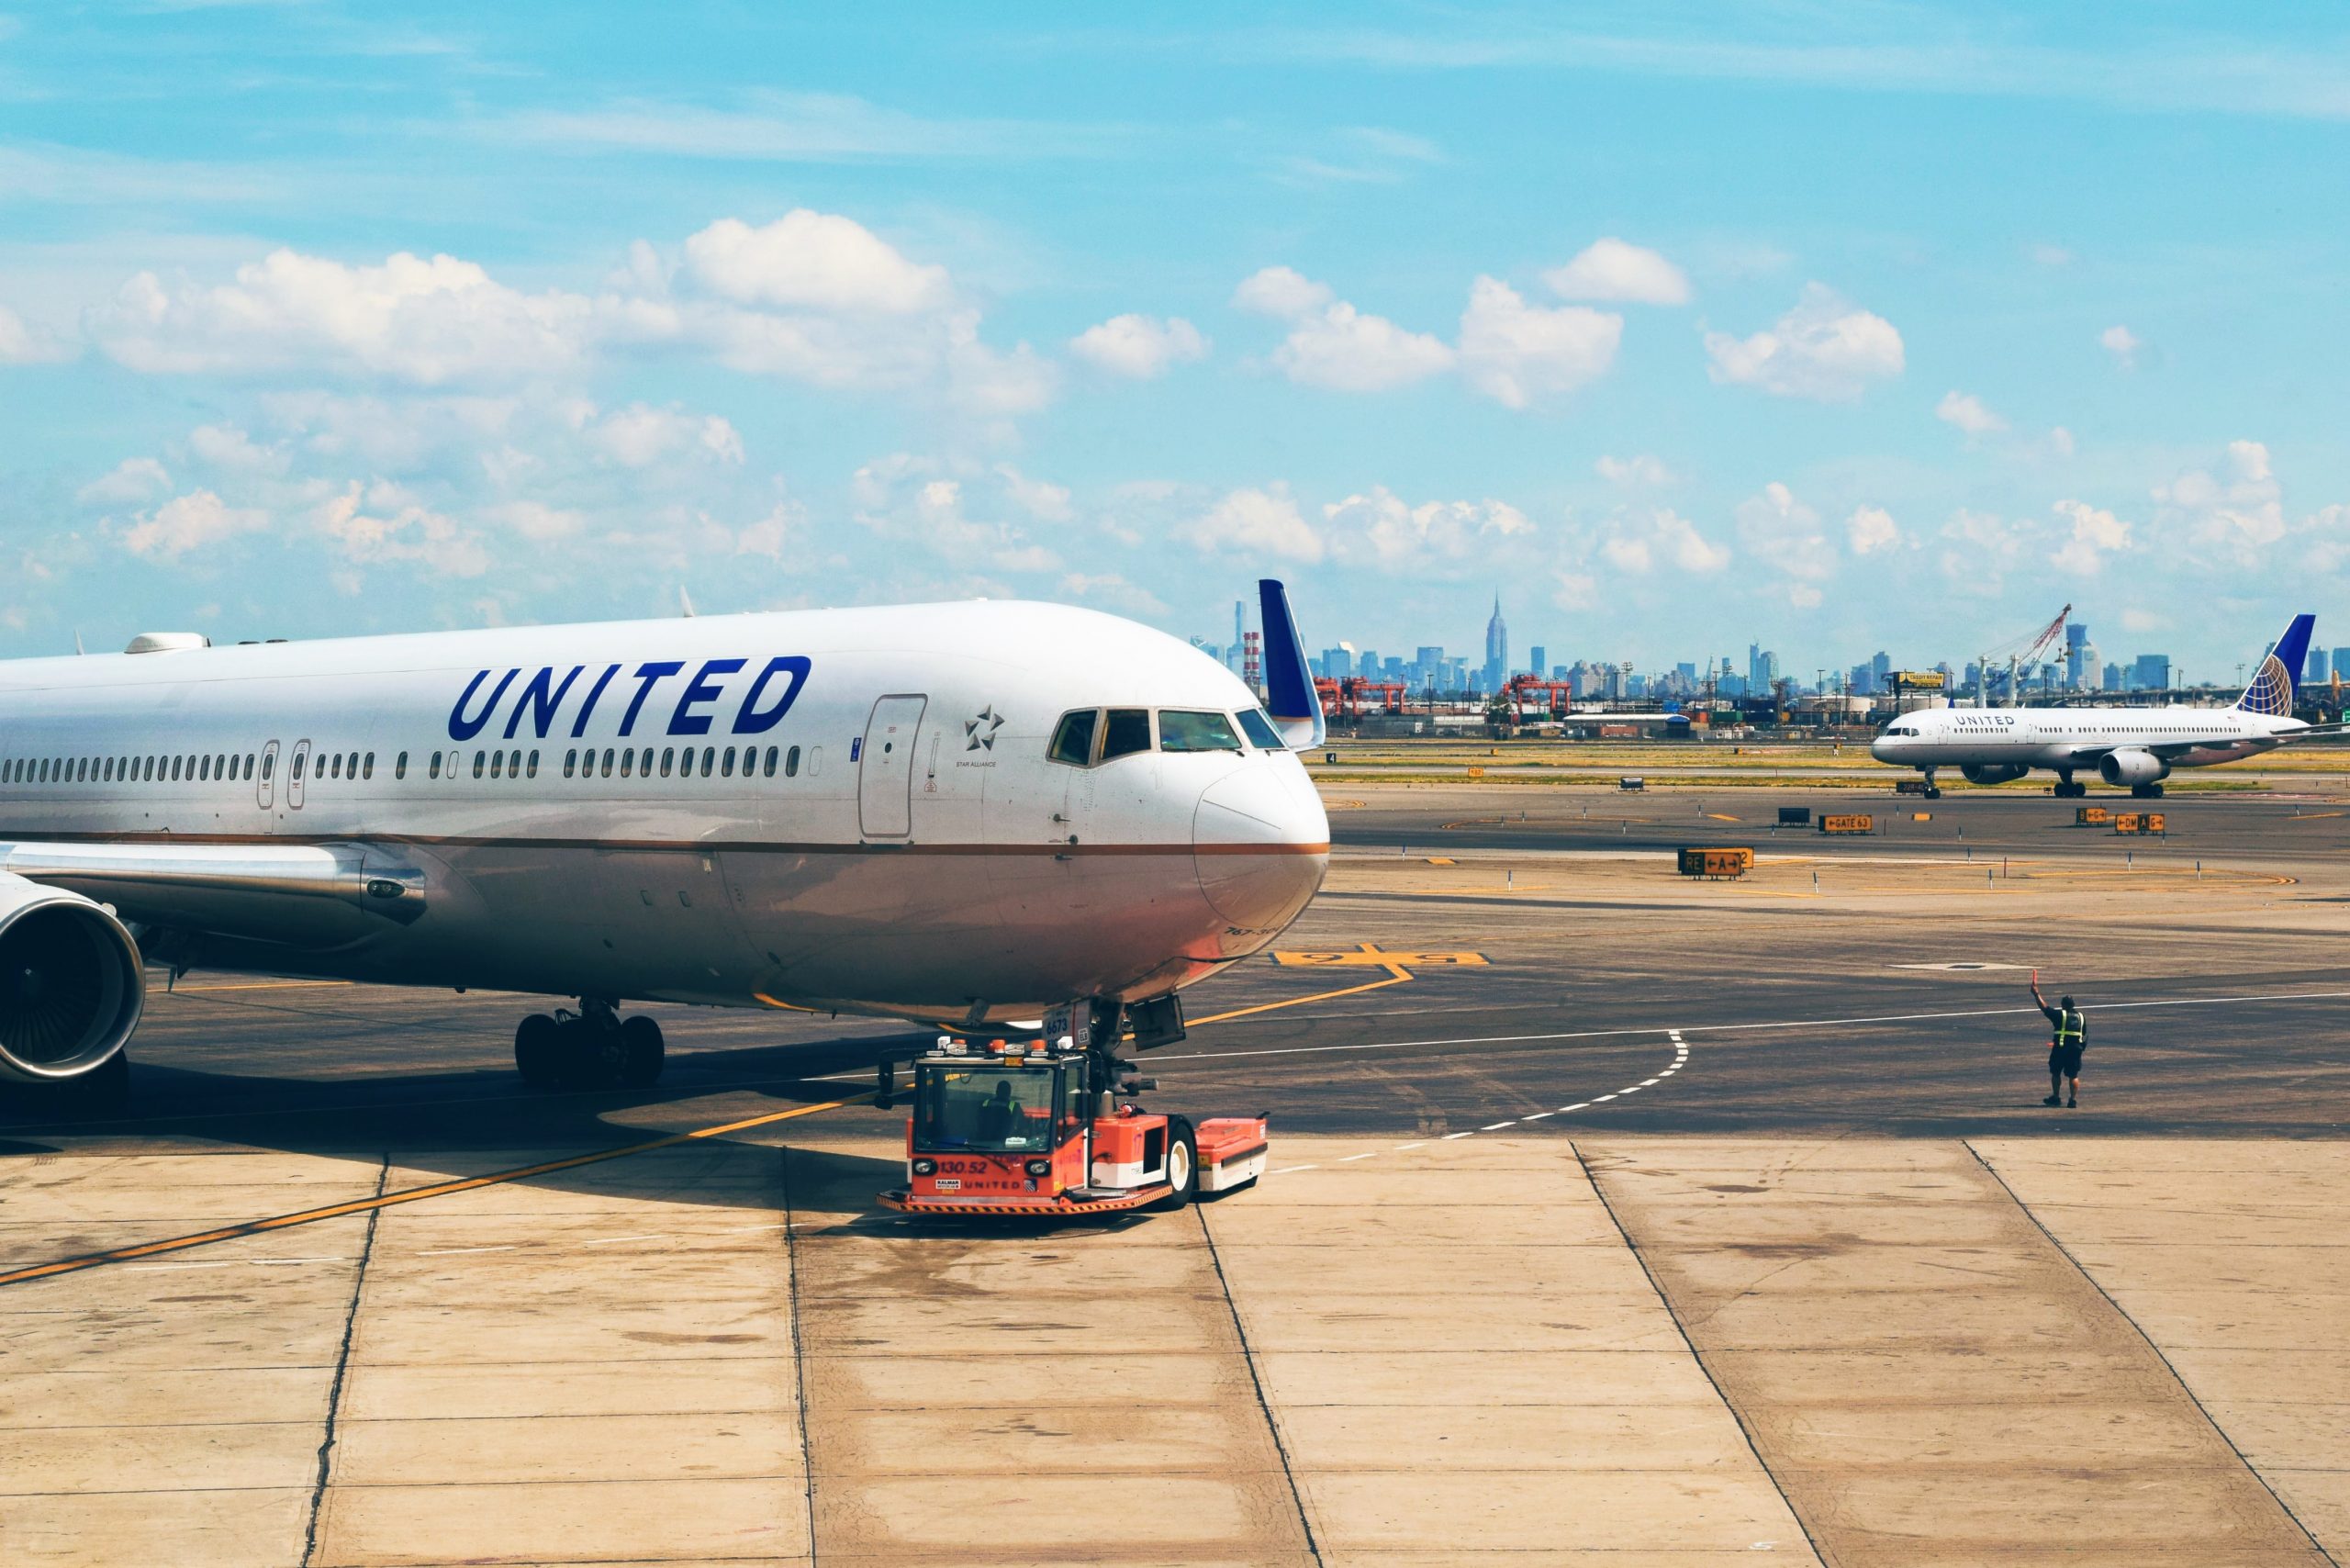 United Airlines' Big Aircraft Order Has Both Upsides and Risks